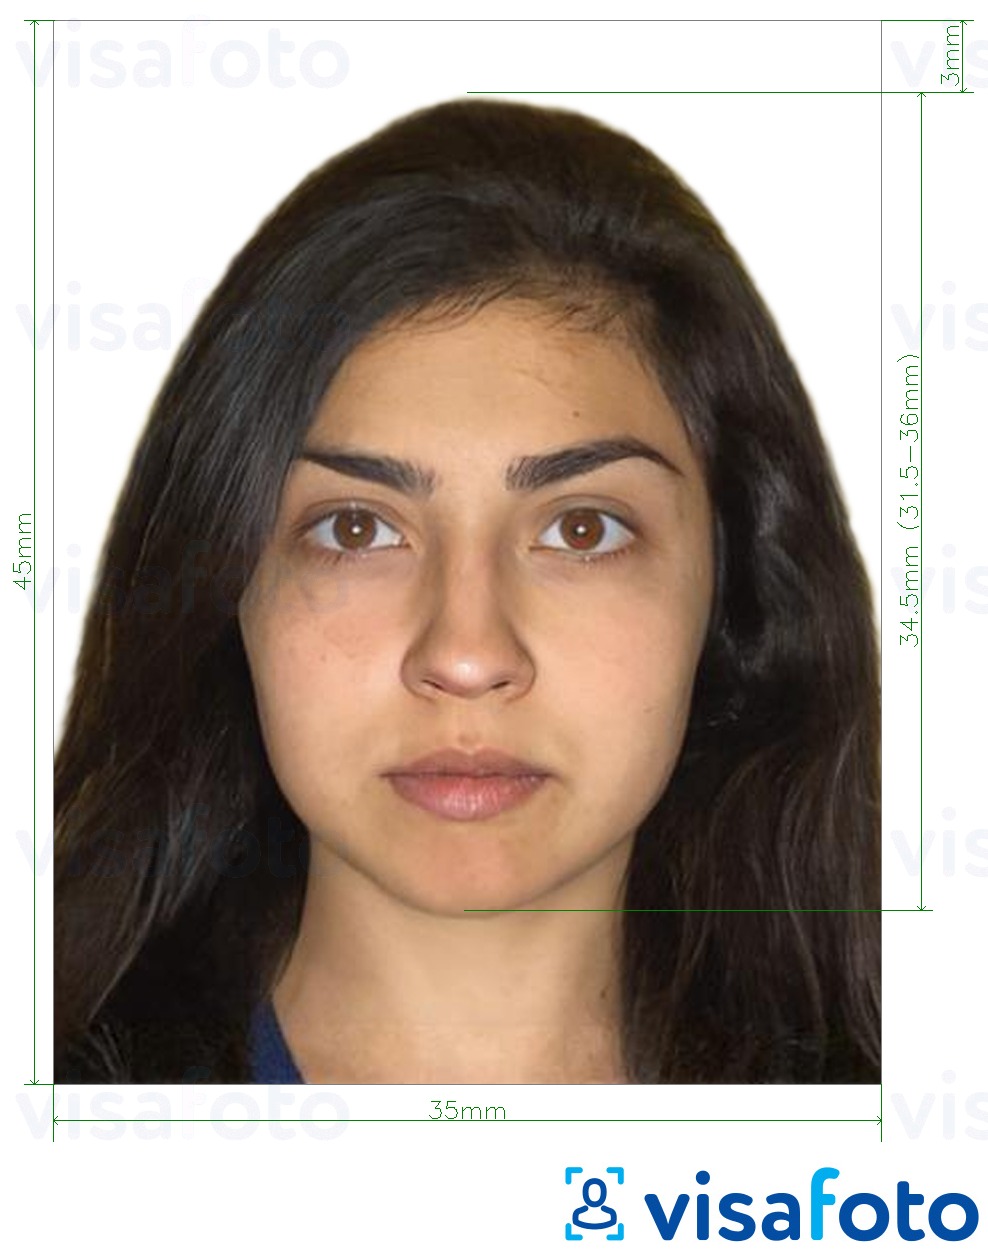 Example of photo for Bangladesh passport application 45x35 mm (4.5x3.5 cm) with exact size specification